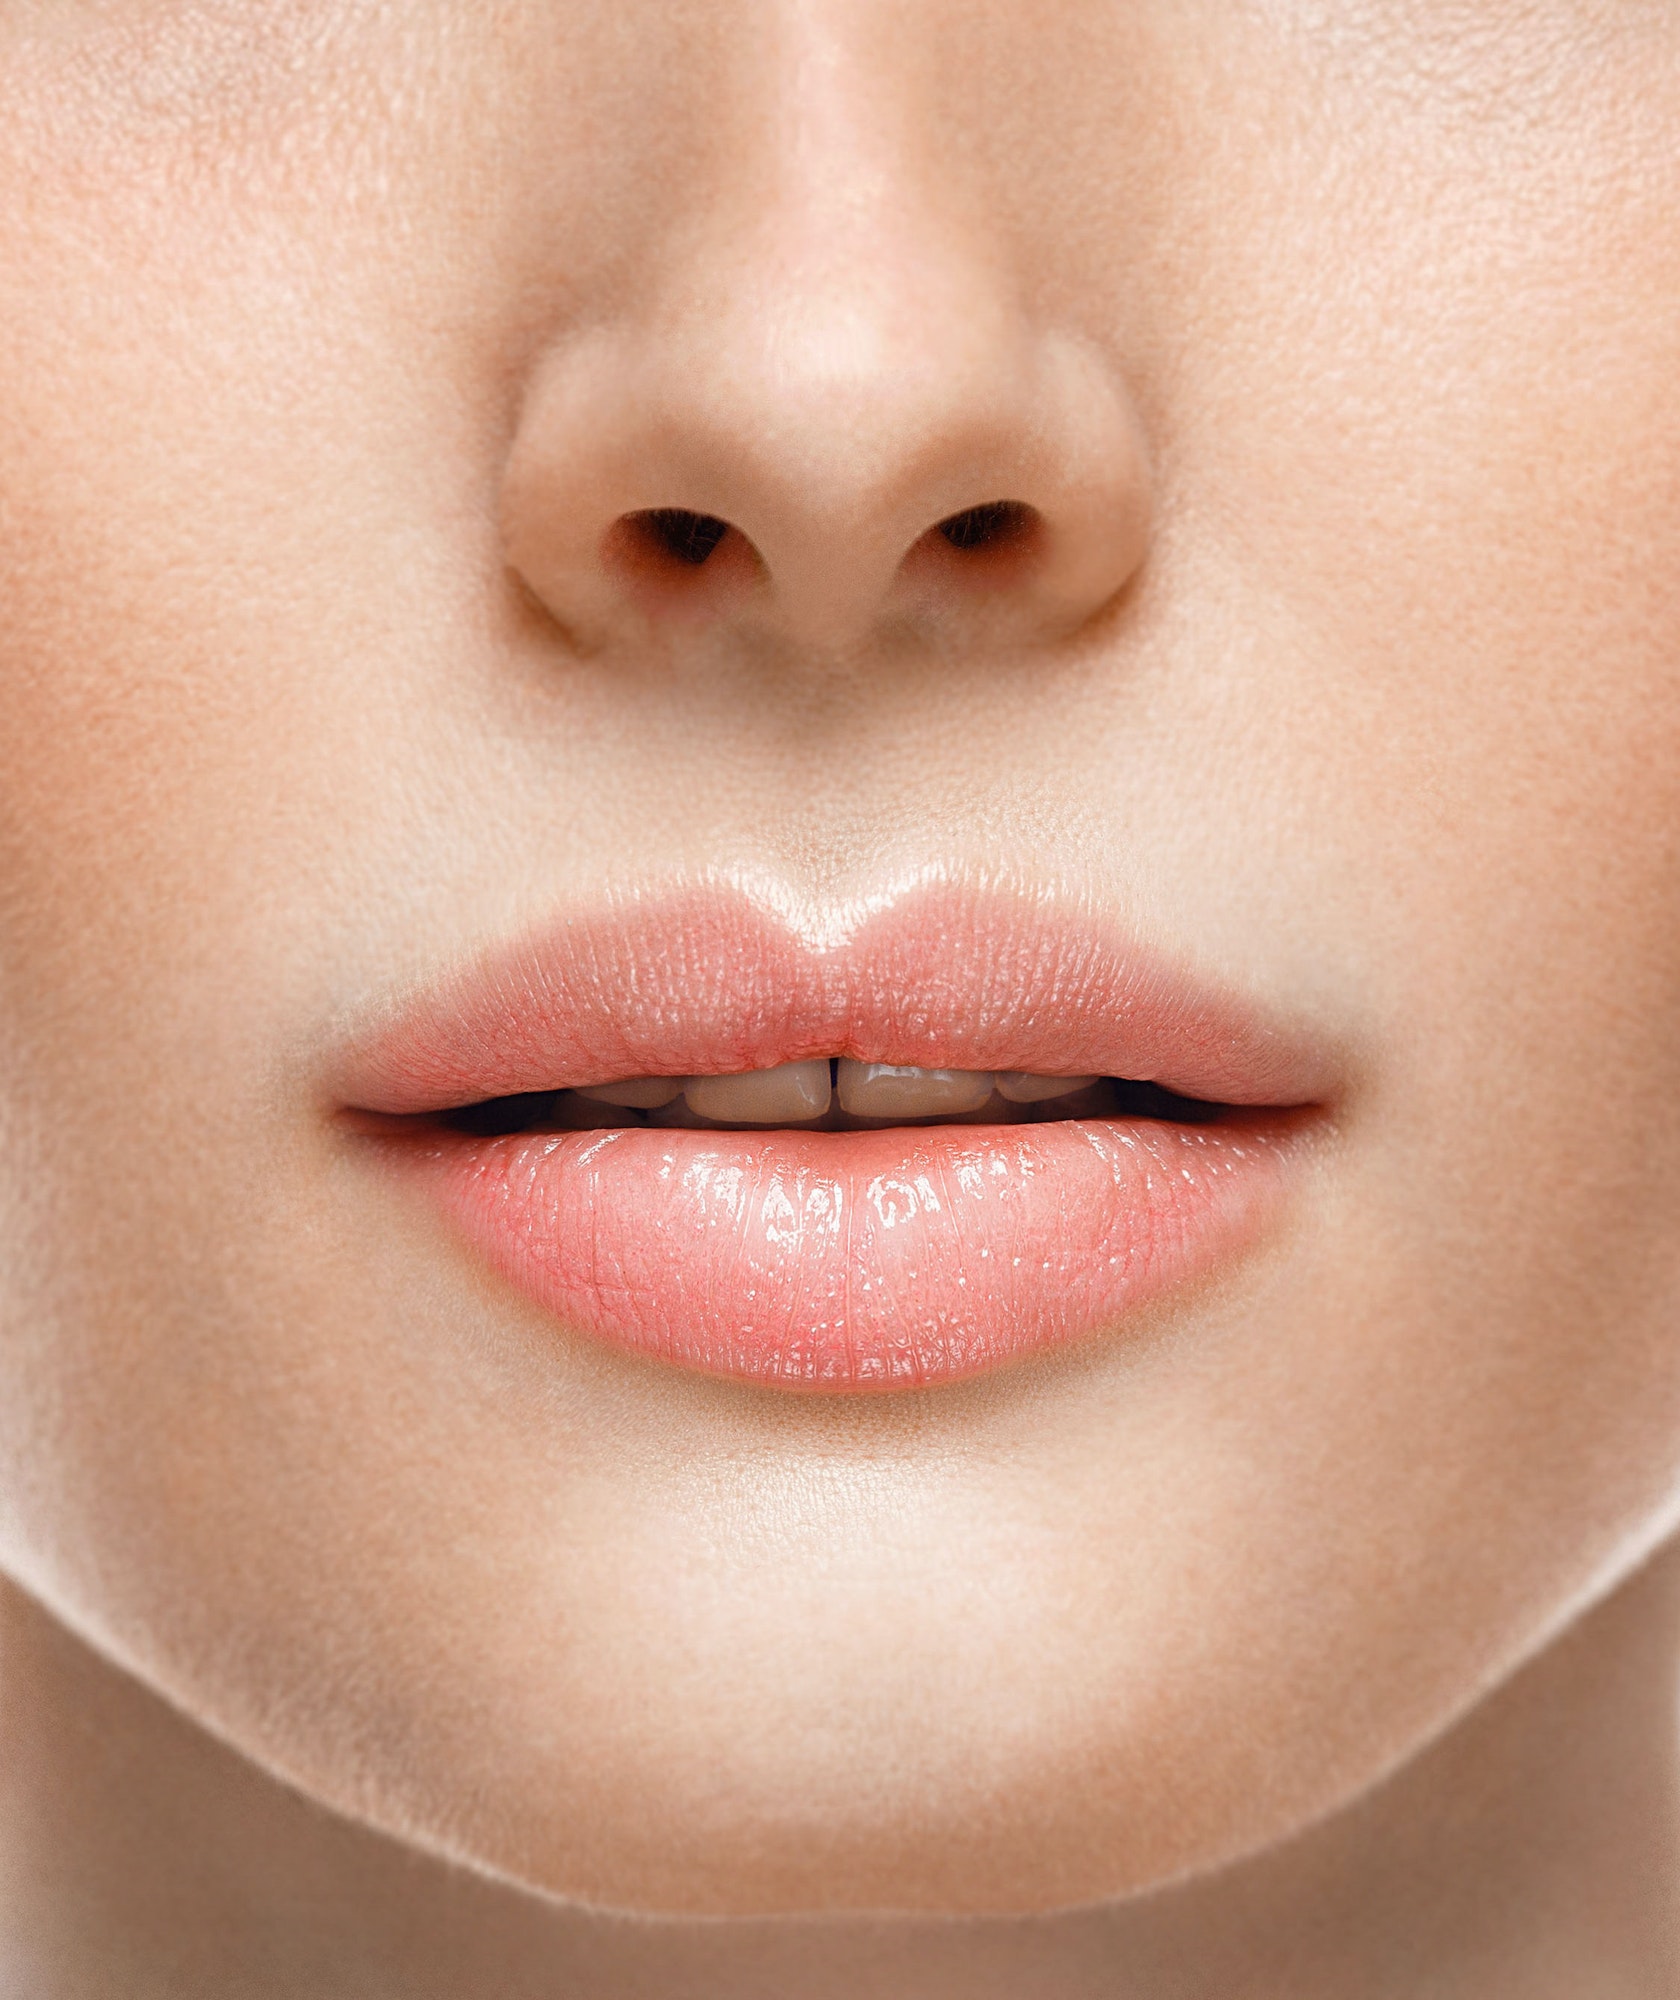 Woman face lips and nose studio white background